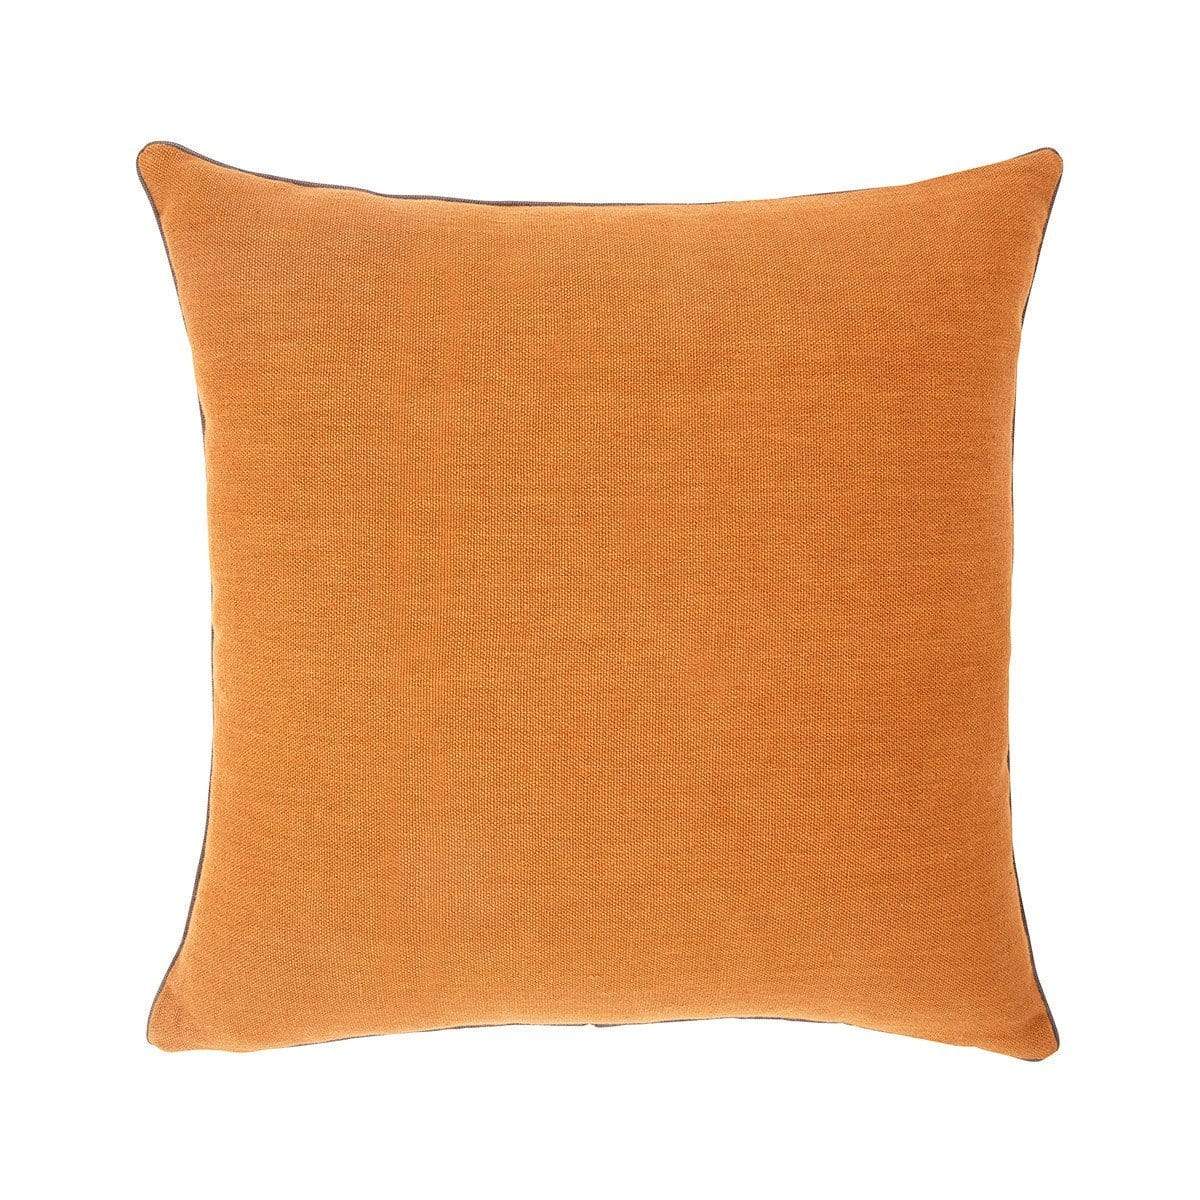 Iosis Pigment Decorative Pillow by Yves Delorme Everett Stunz